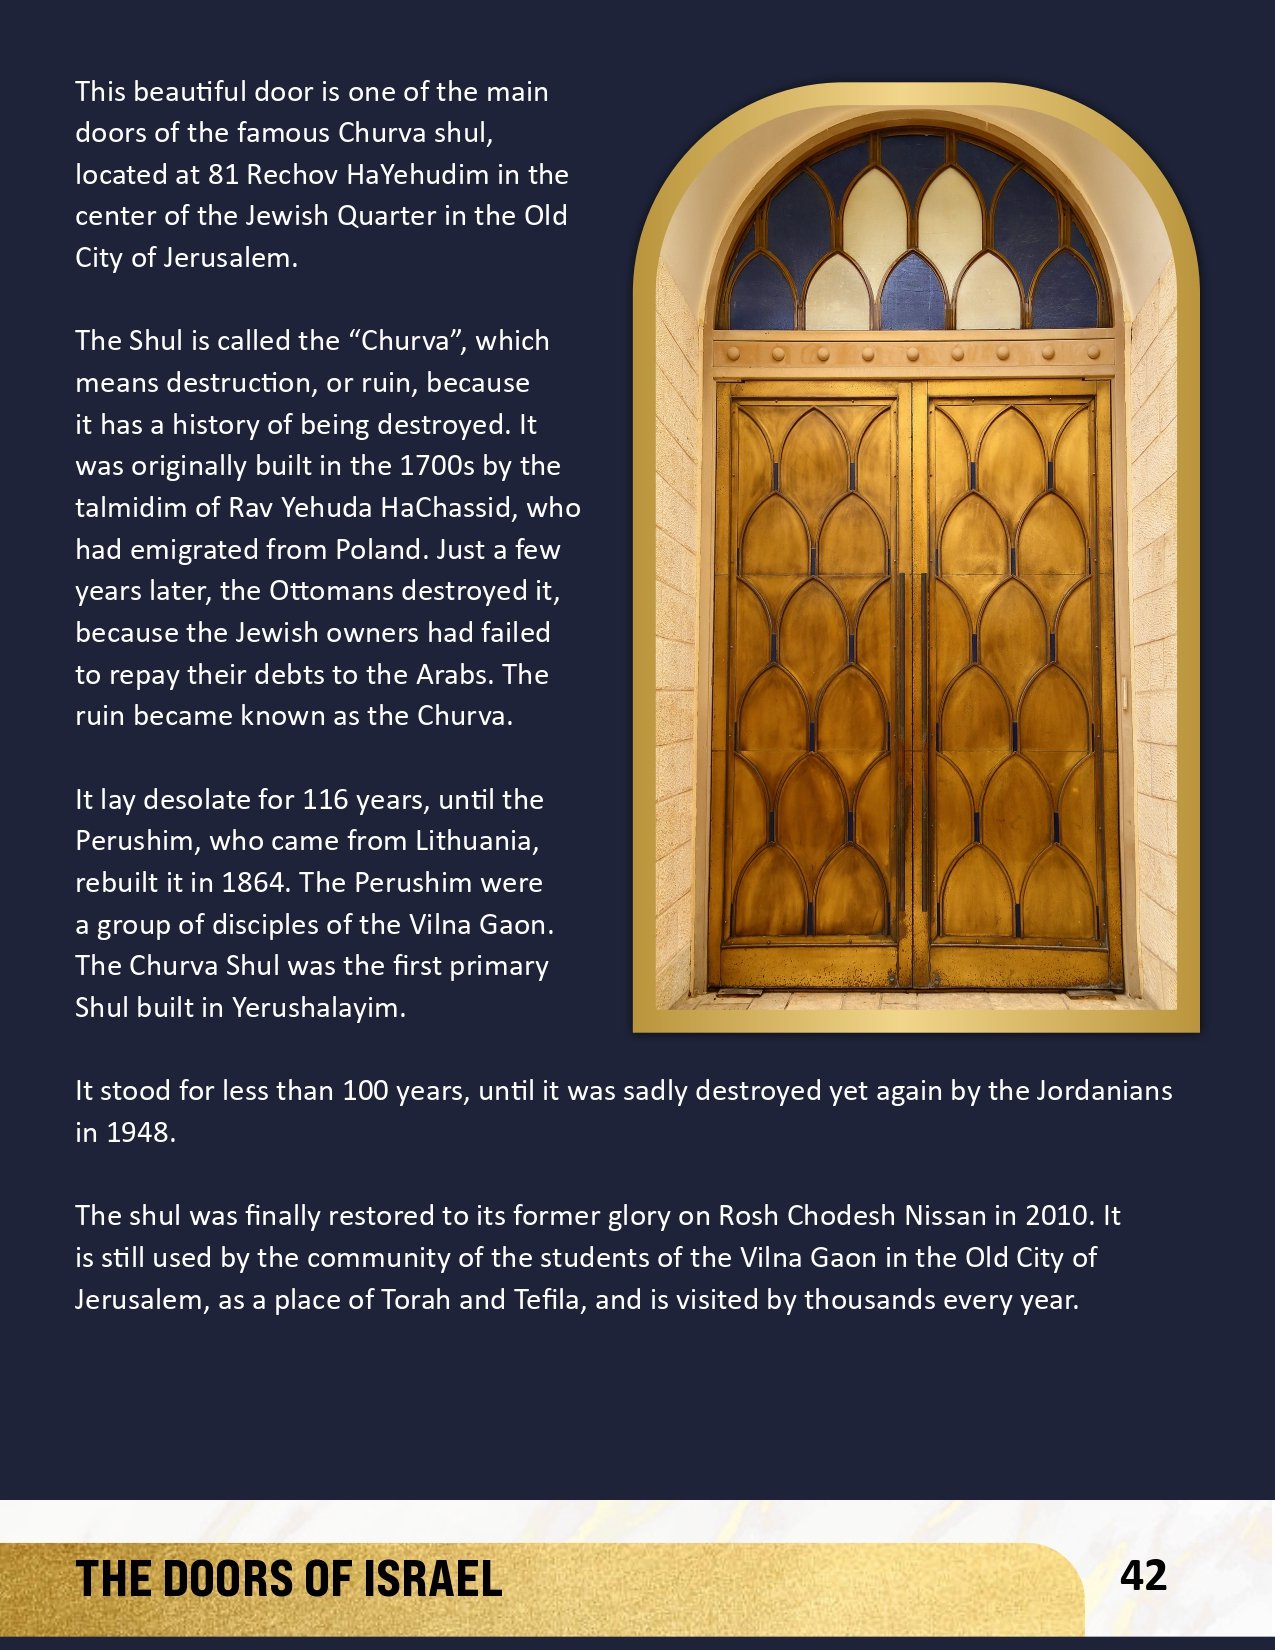 THE DOORS OF ISRAEL-6 INSIDE TEXT-42_page-0001.jpg